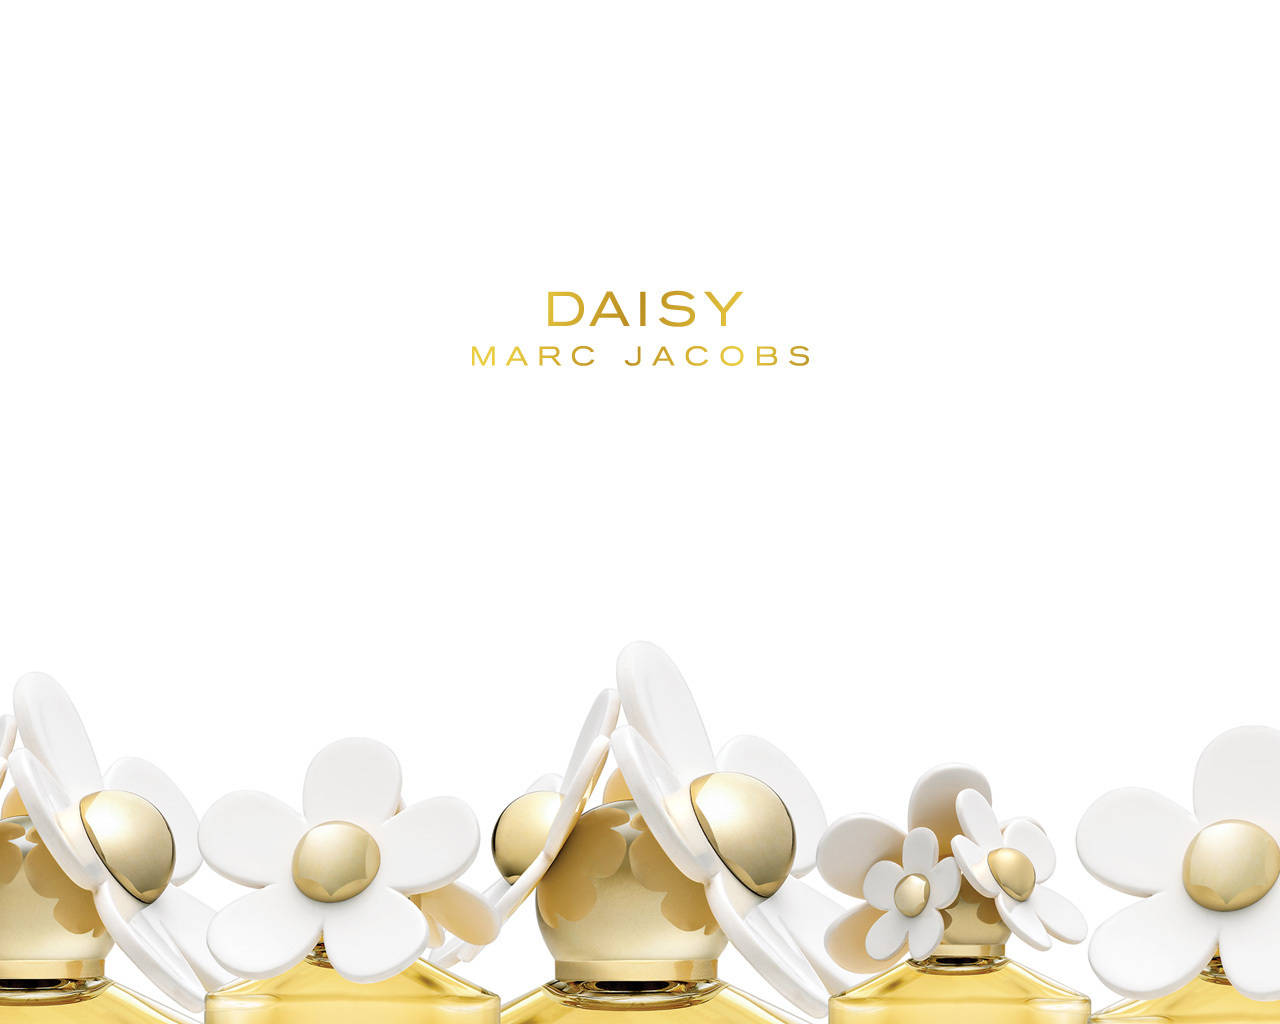 Marc Jacobs White & Gold Daisy Variant Background